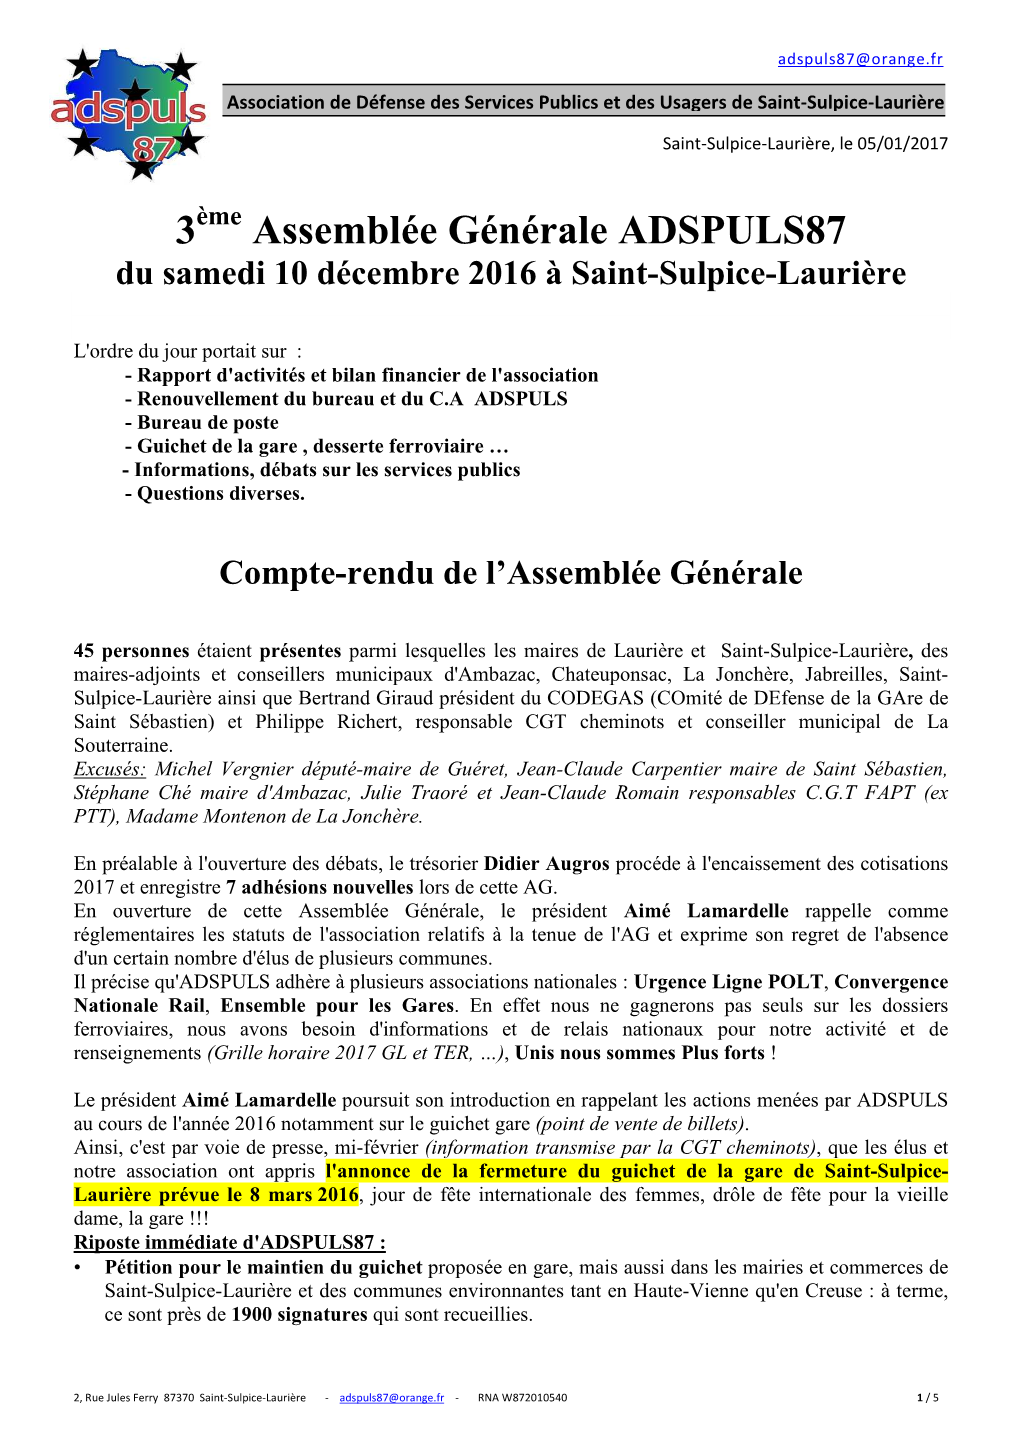 CR AG 2016 ADSPULS87 2 Complet